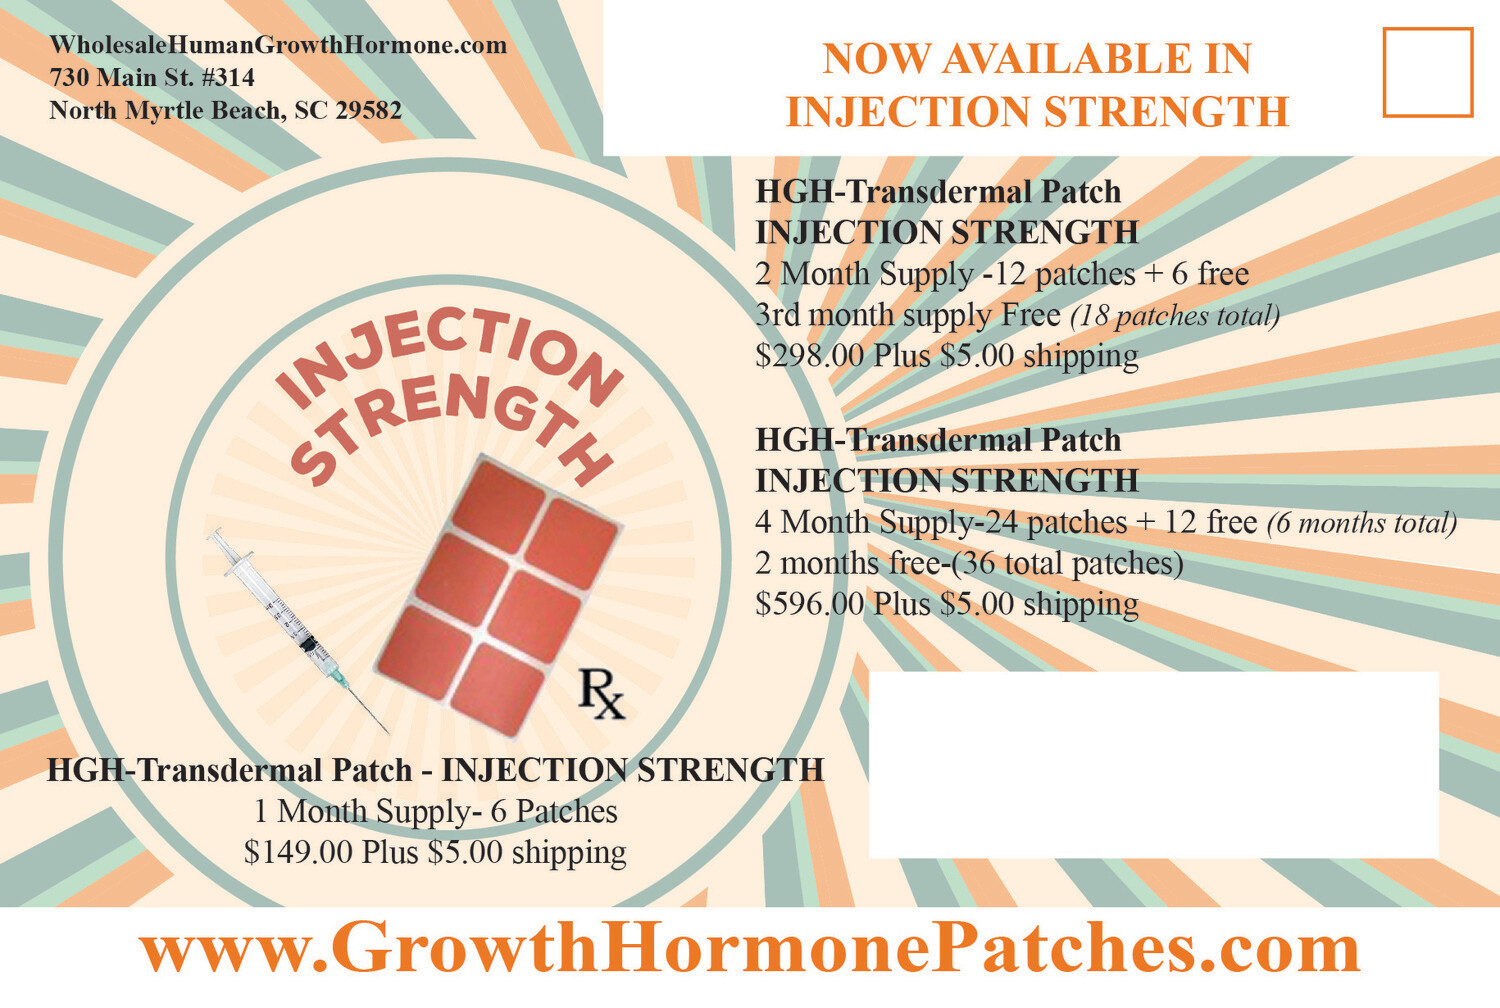 HGH-Transdermal Injection strength patches (1 month Supply - 6 Patches)